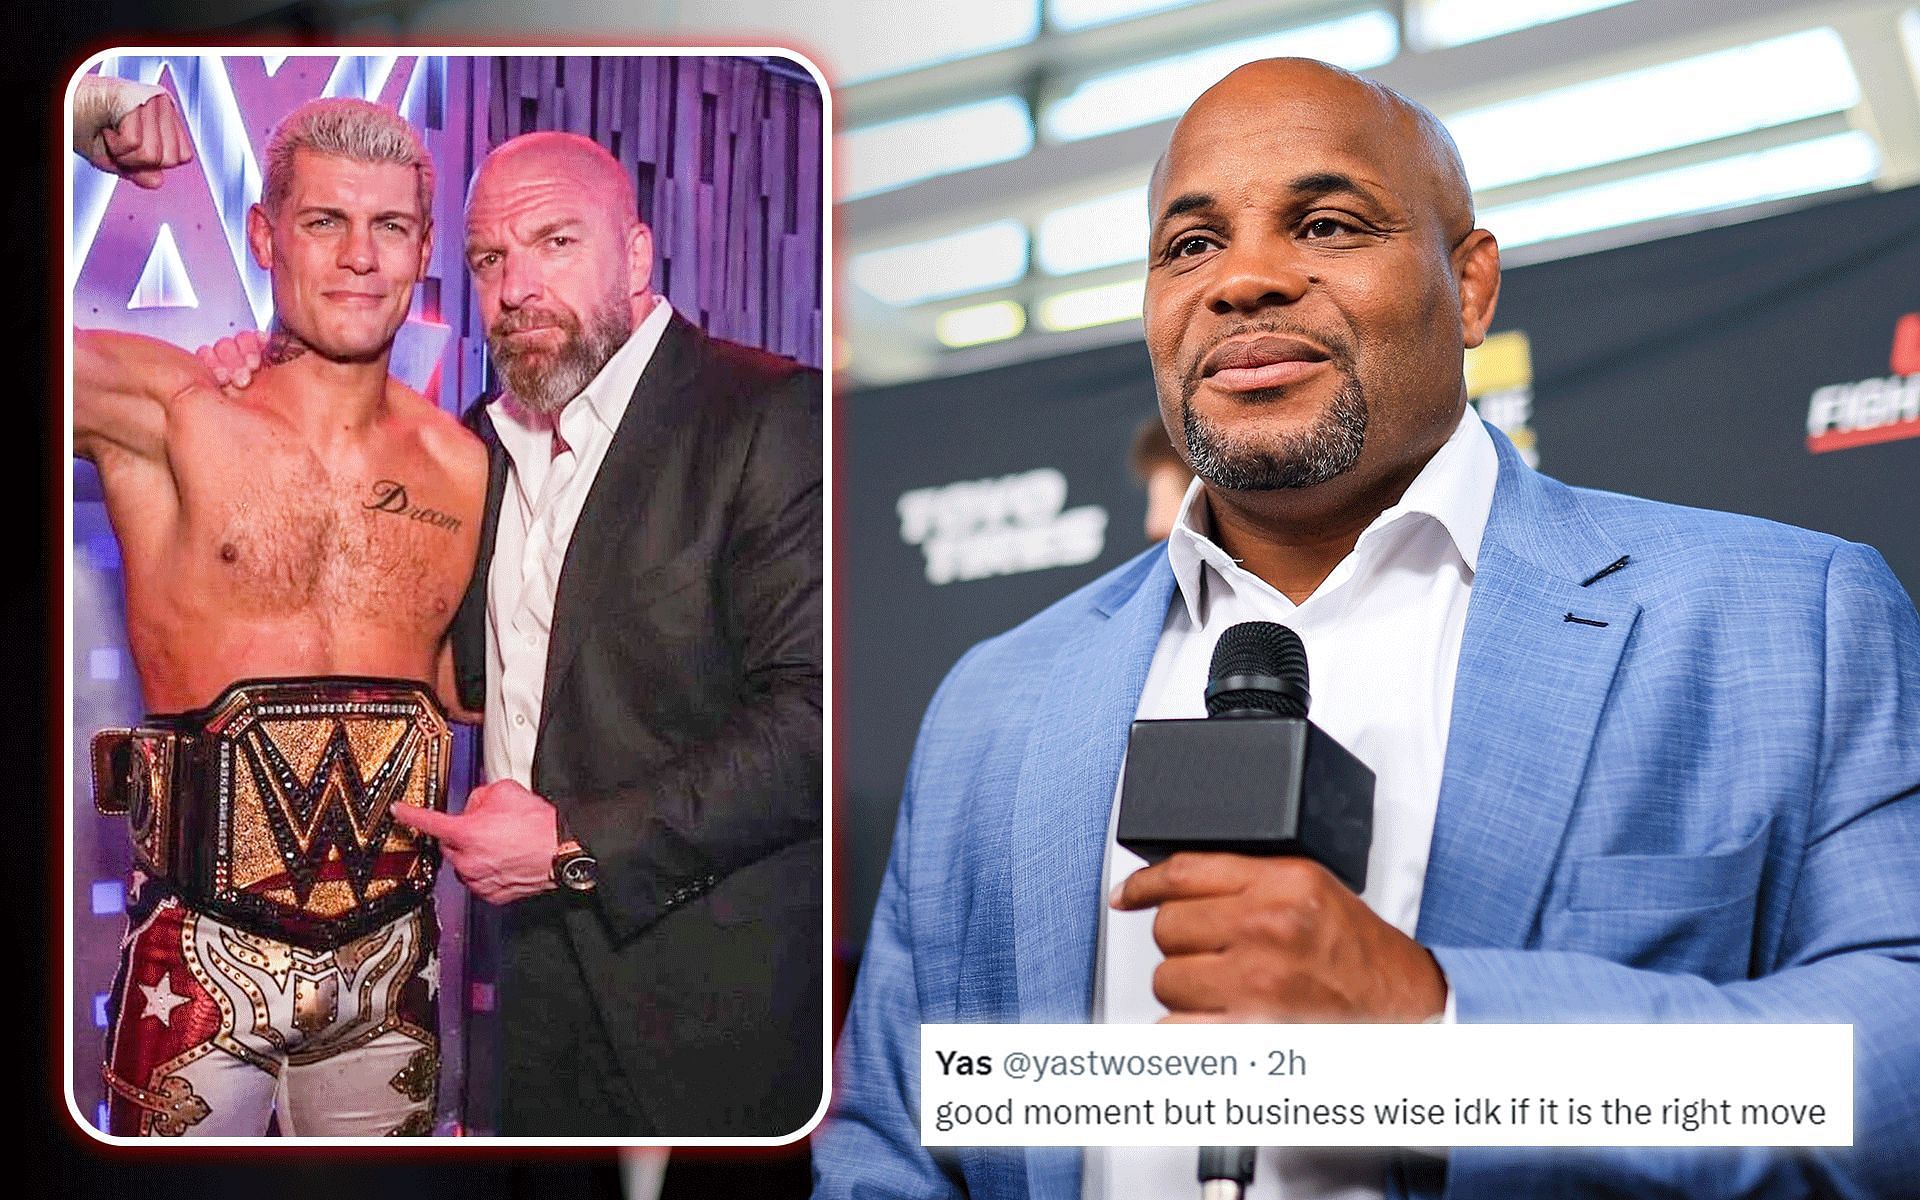 Cody Rhodes (left) has credited Triple H (middle) for his rise to the top in WWE; Daniel Cormier (right) has long been a fan of the WWE [Images courtesy: @wwe on Instagram and Getty Images]